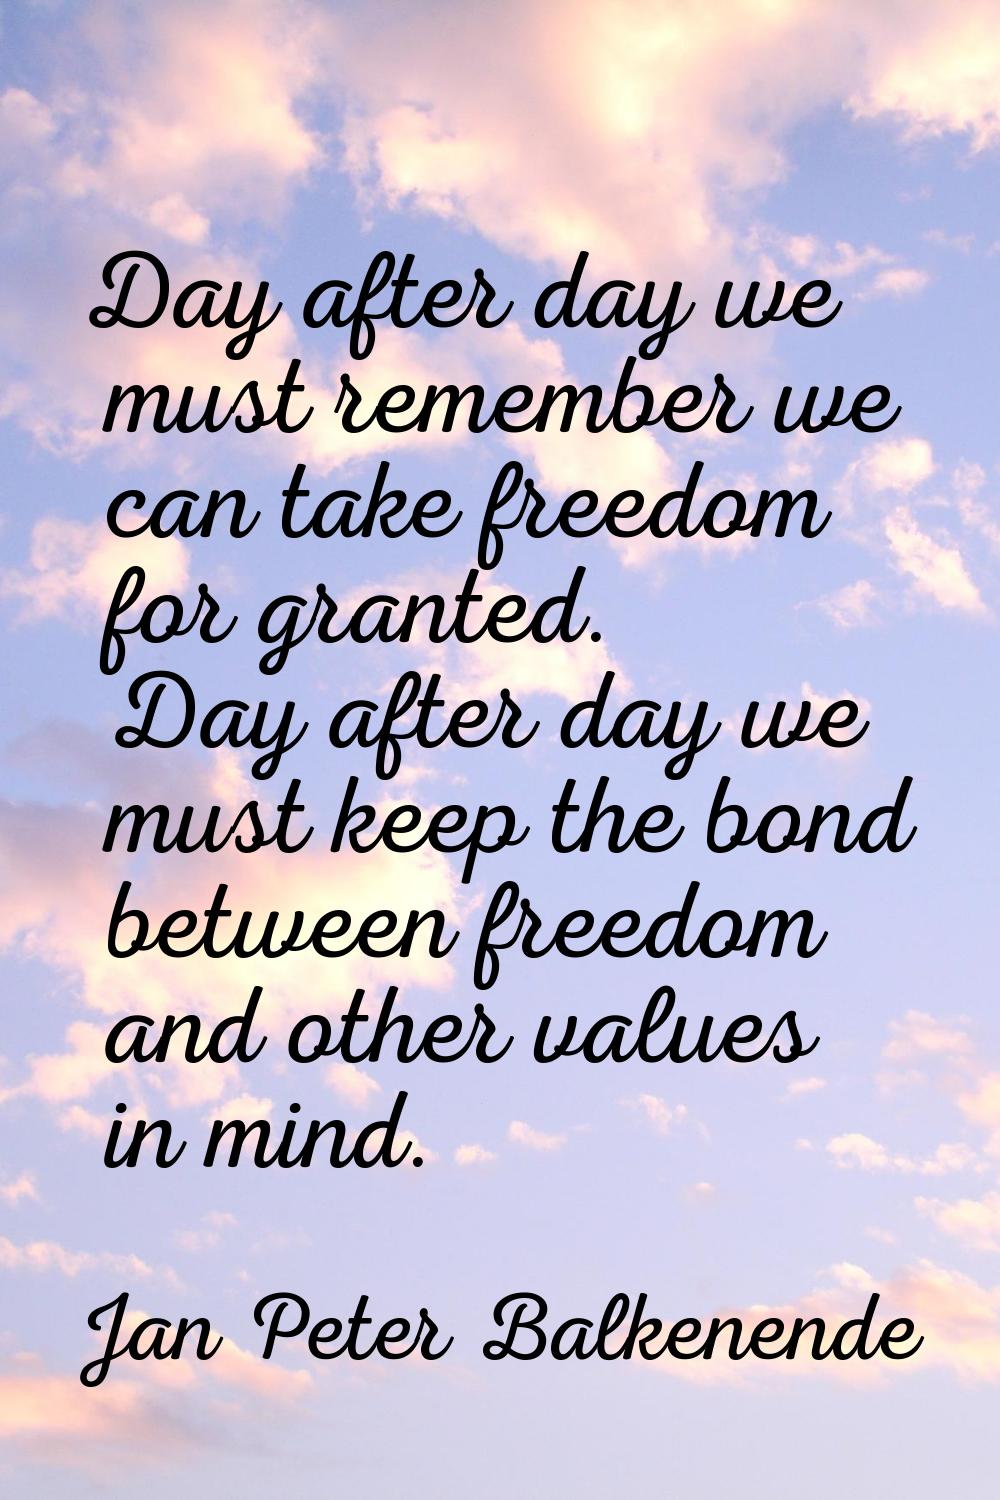 Day after day we must remember we can take freedom for granted. Day after day we must keep the bond